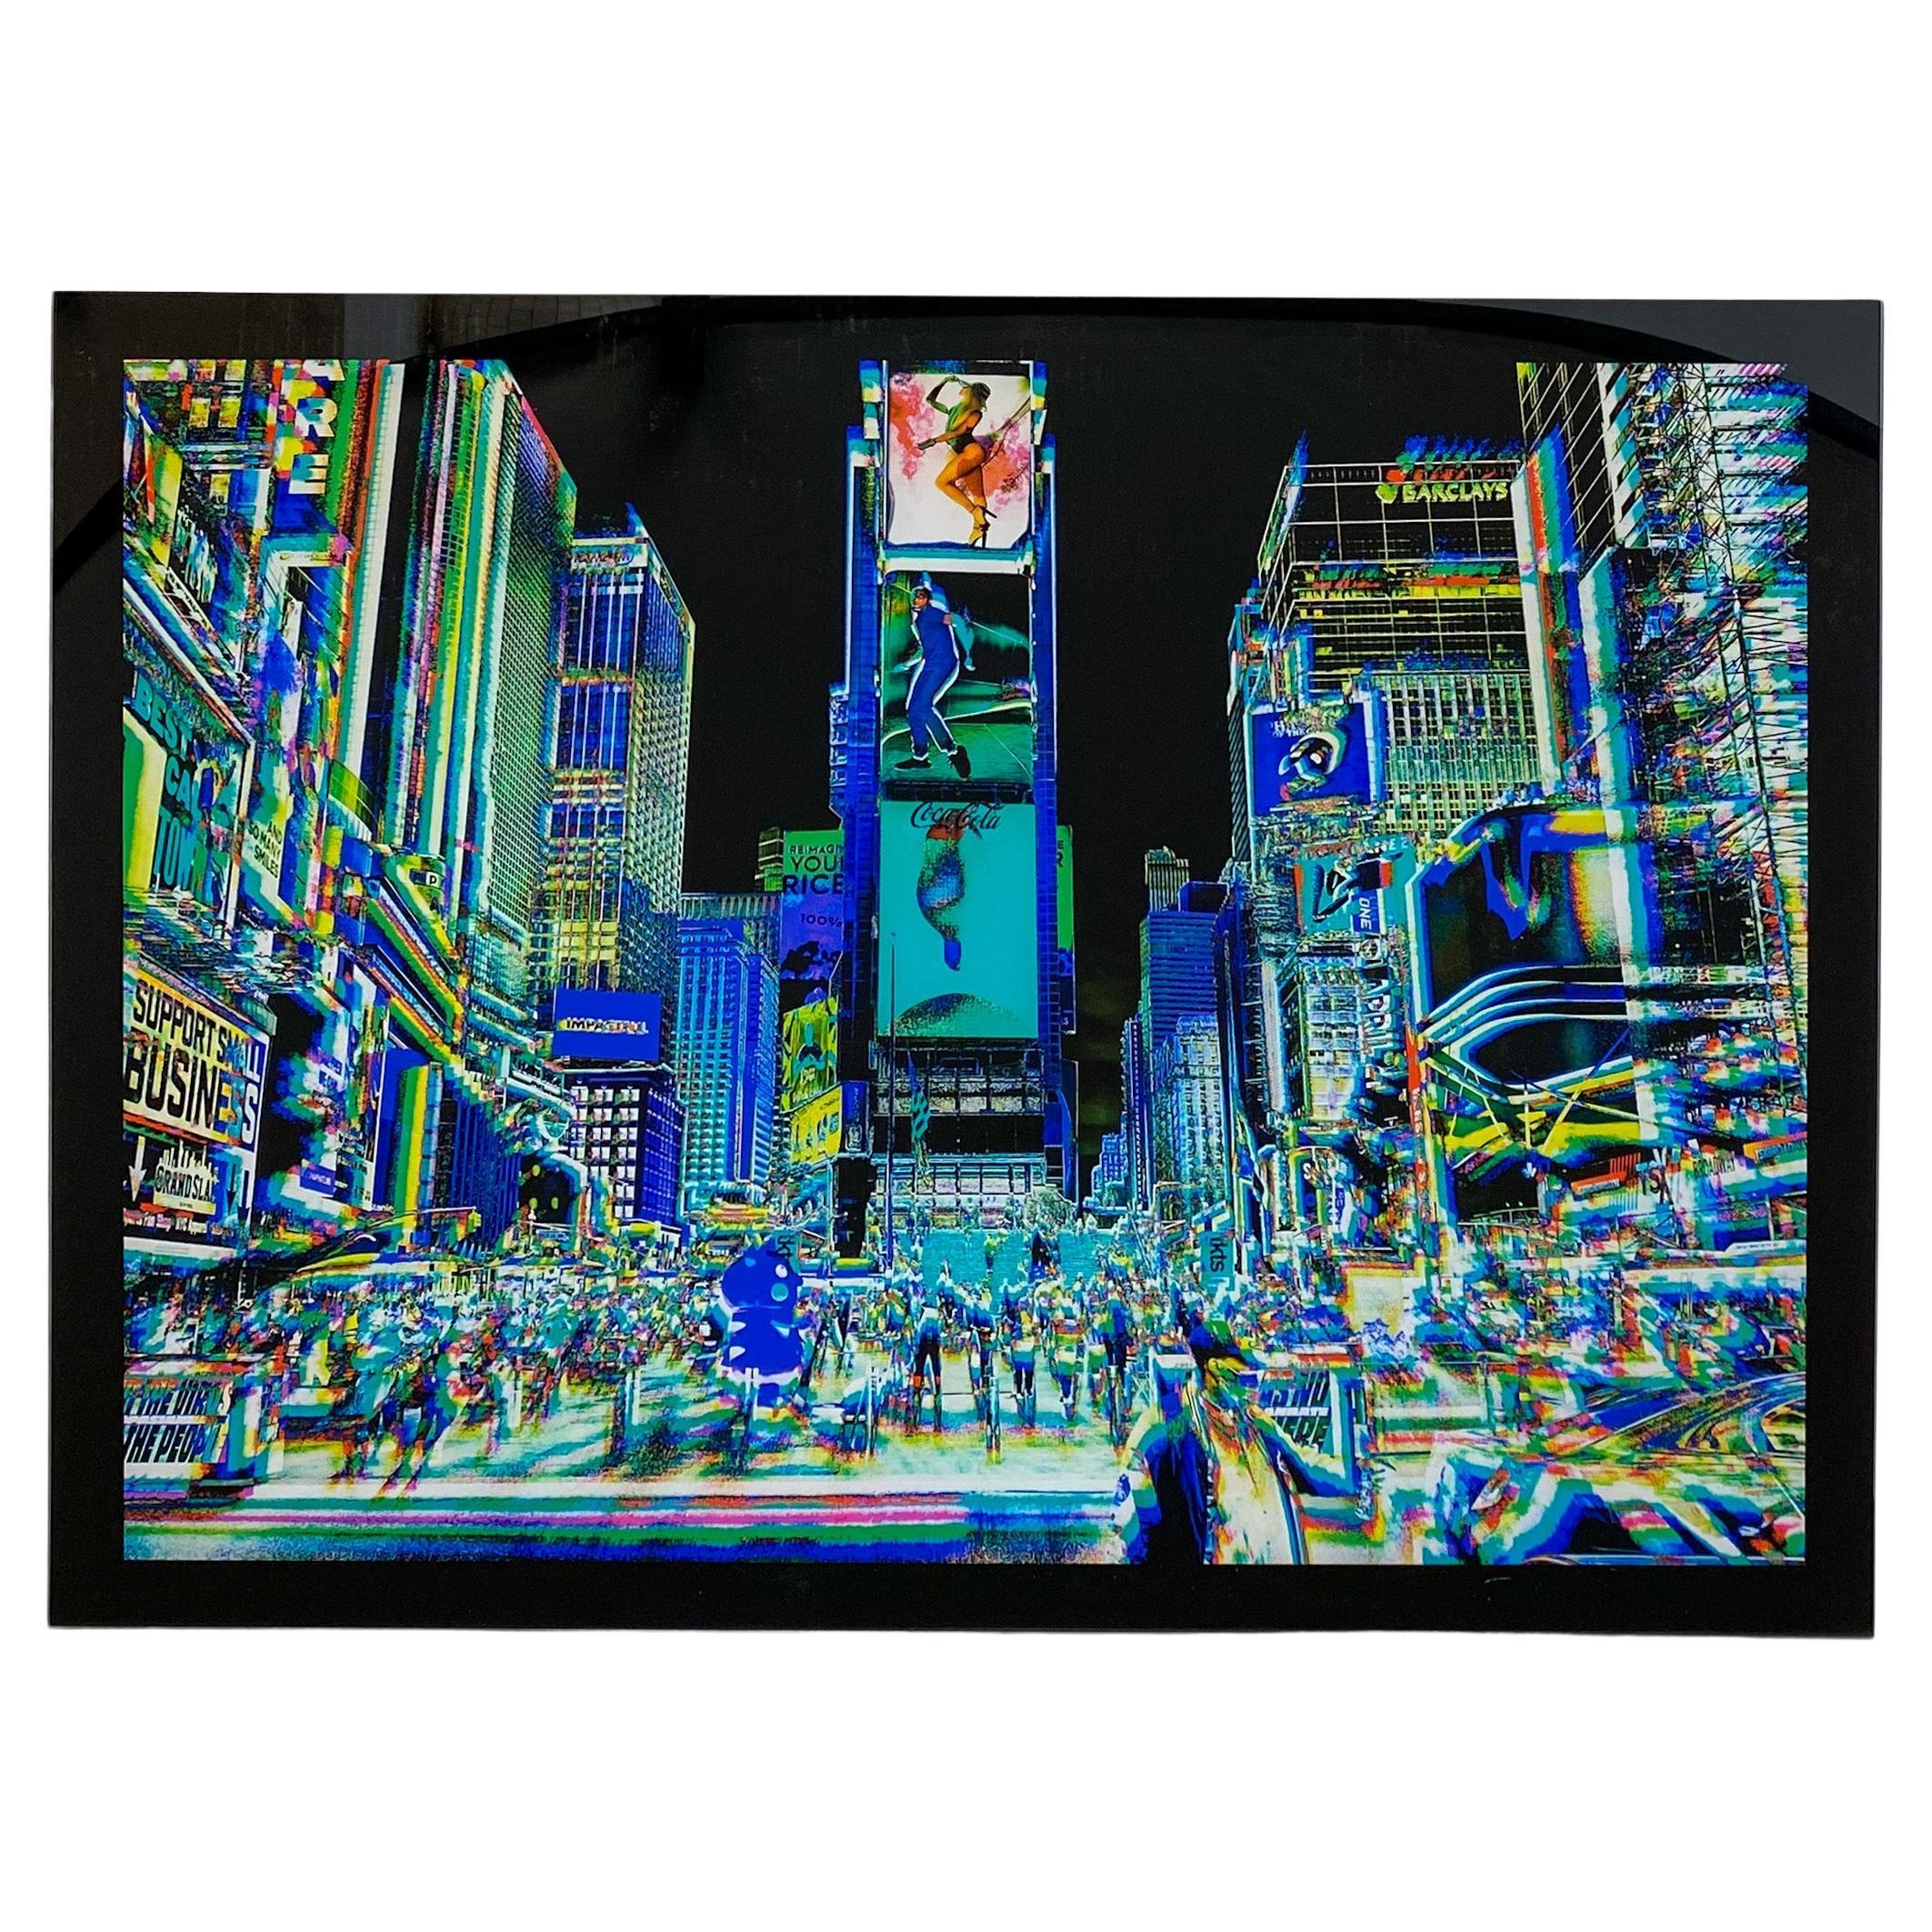 An inspiring digital photography on plexiglass art work by the contemporary artist Marc Vandermeer ( American, 1950's). The photography entitled " Night on Broadway" portrays New York City's famous lives;y Broadway avenue through the lens of the